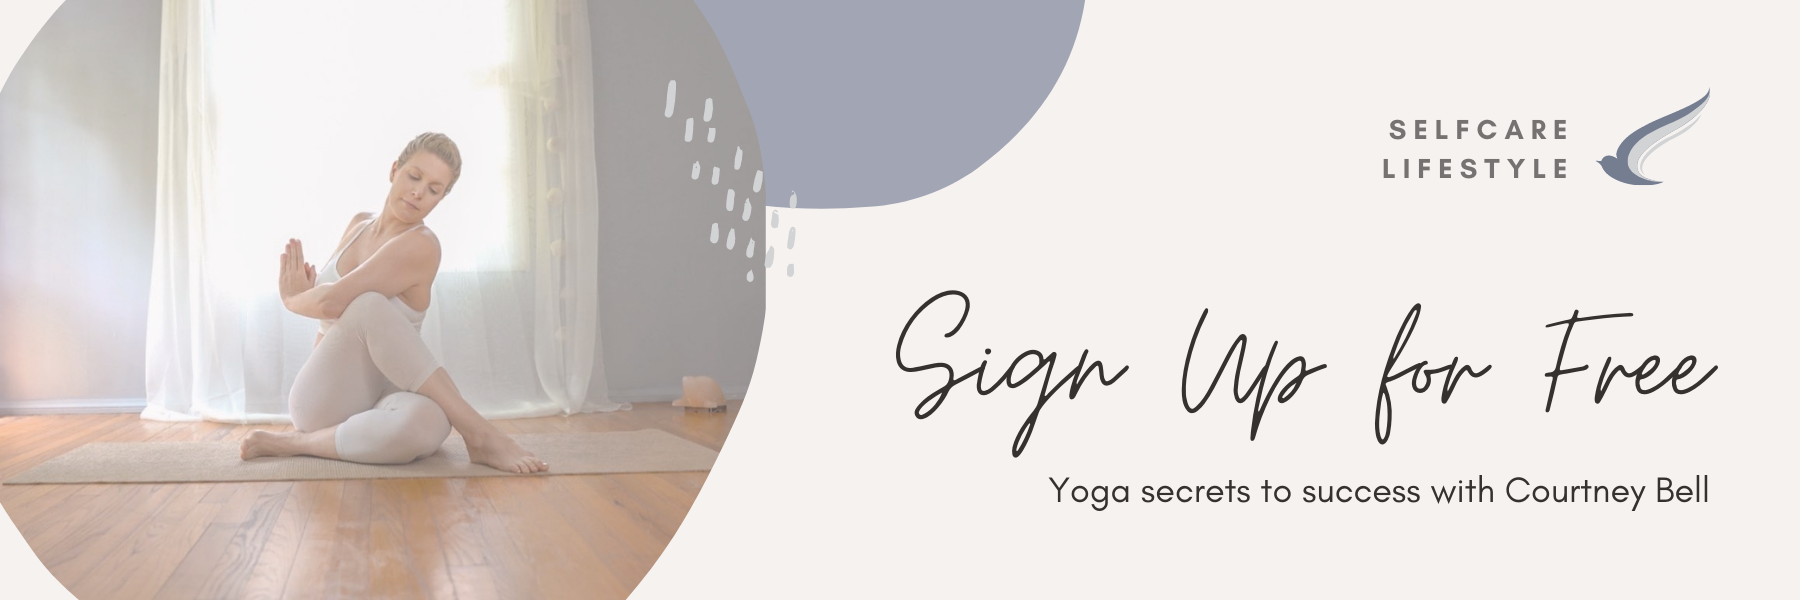 Yoga Video Services Email